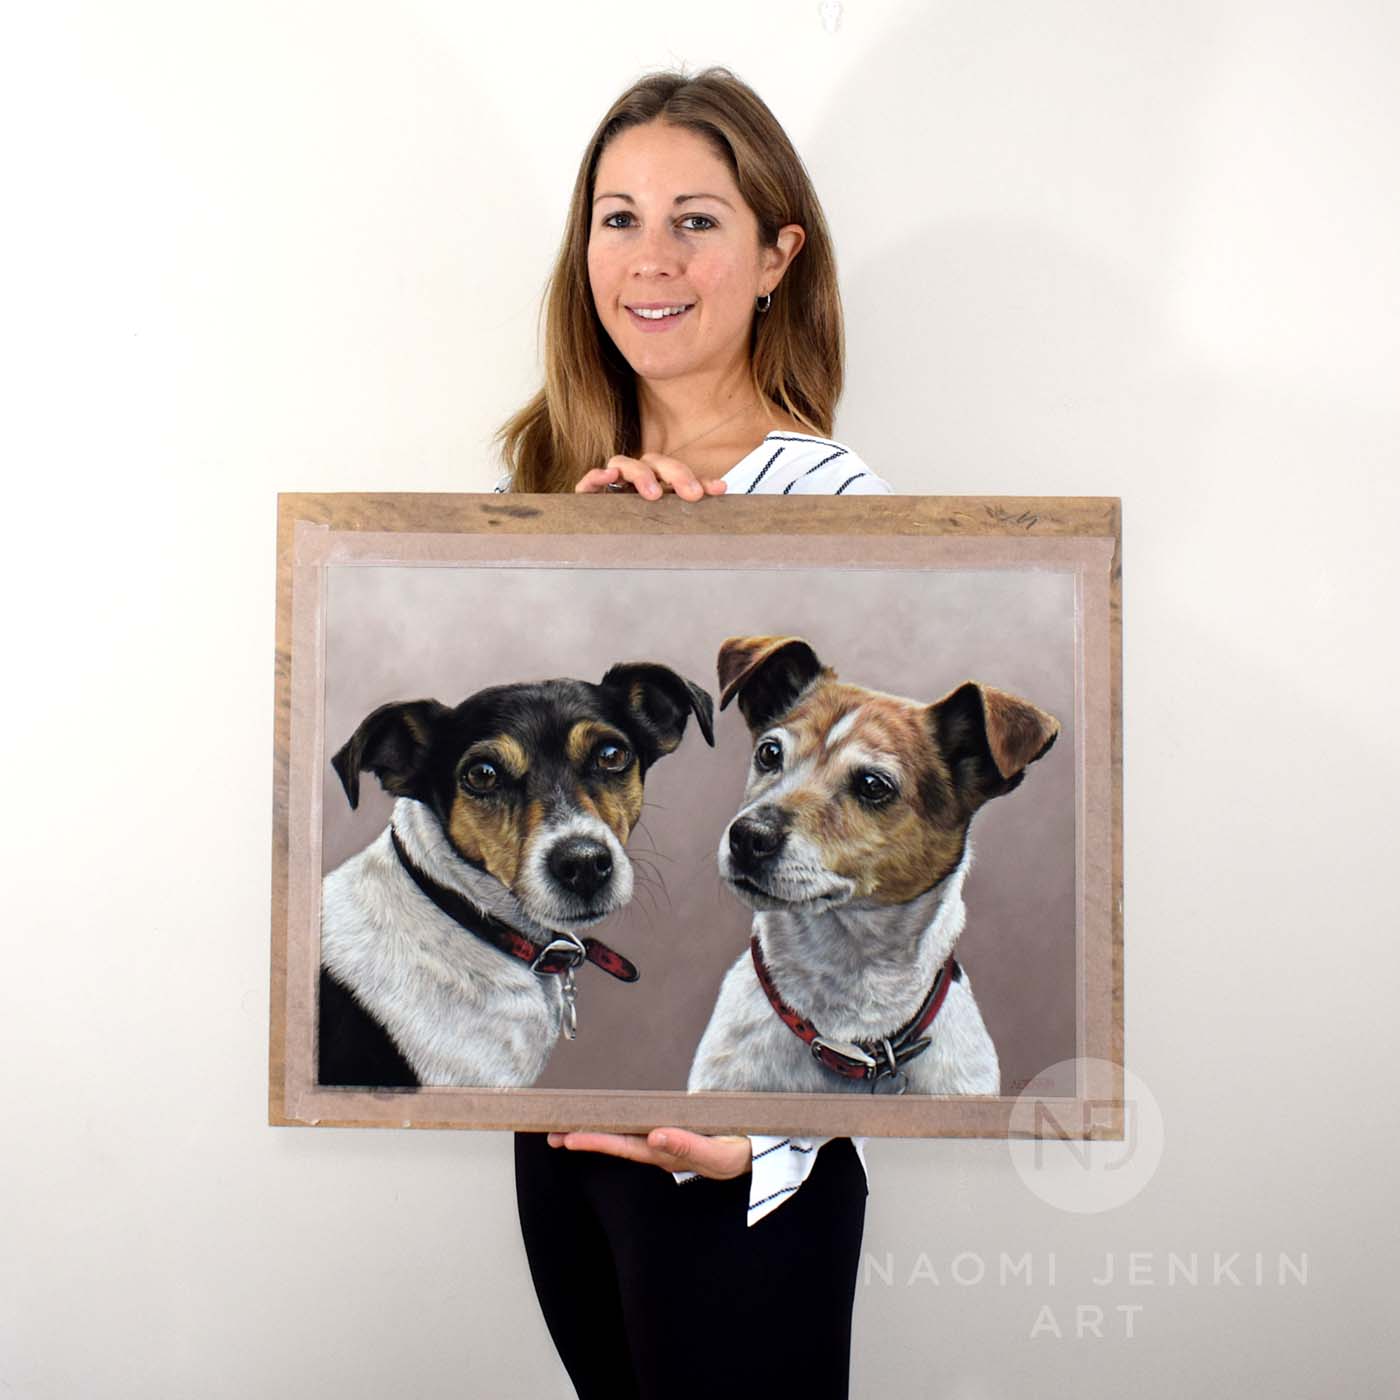 Naomi with portrait of Jack Russells, Margot and Nella